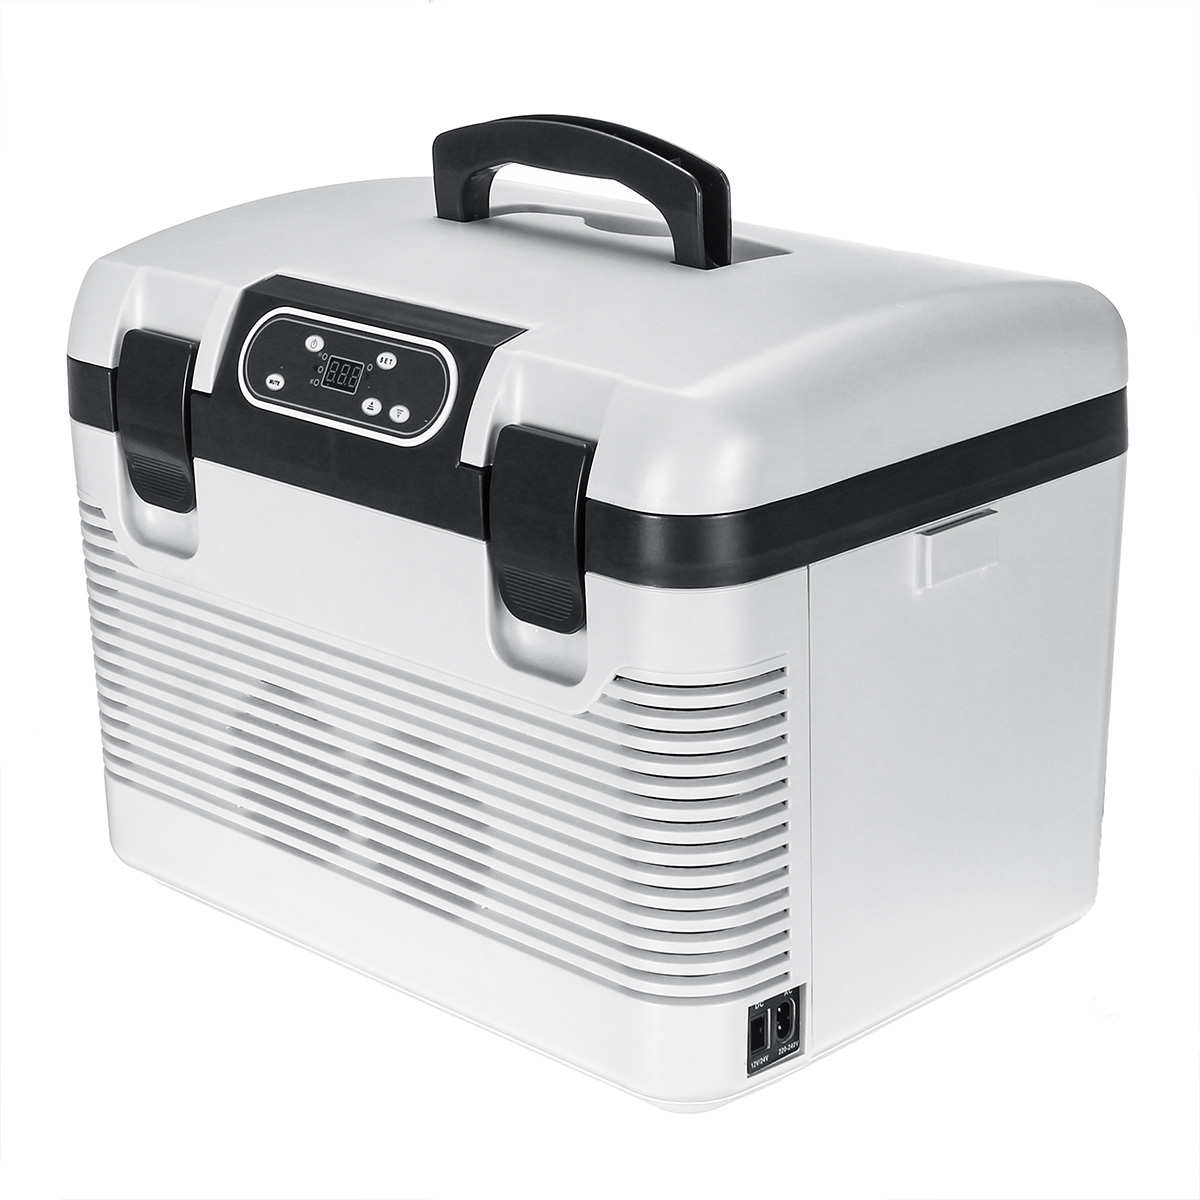 White 19 Liter Compact Portable Cooler Warmer Mini Fridge for Bedroom, Office, Dorm, Car - Great for Camping, Picnic - image 1 of 13